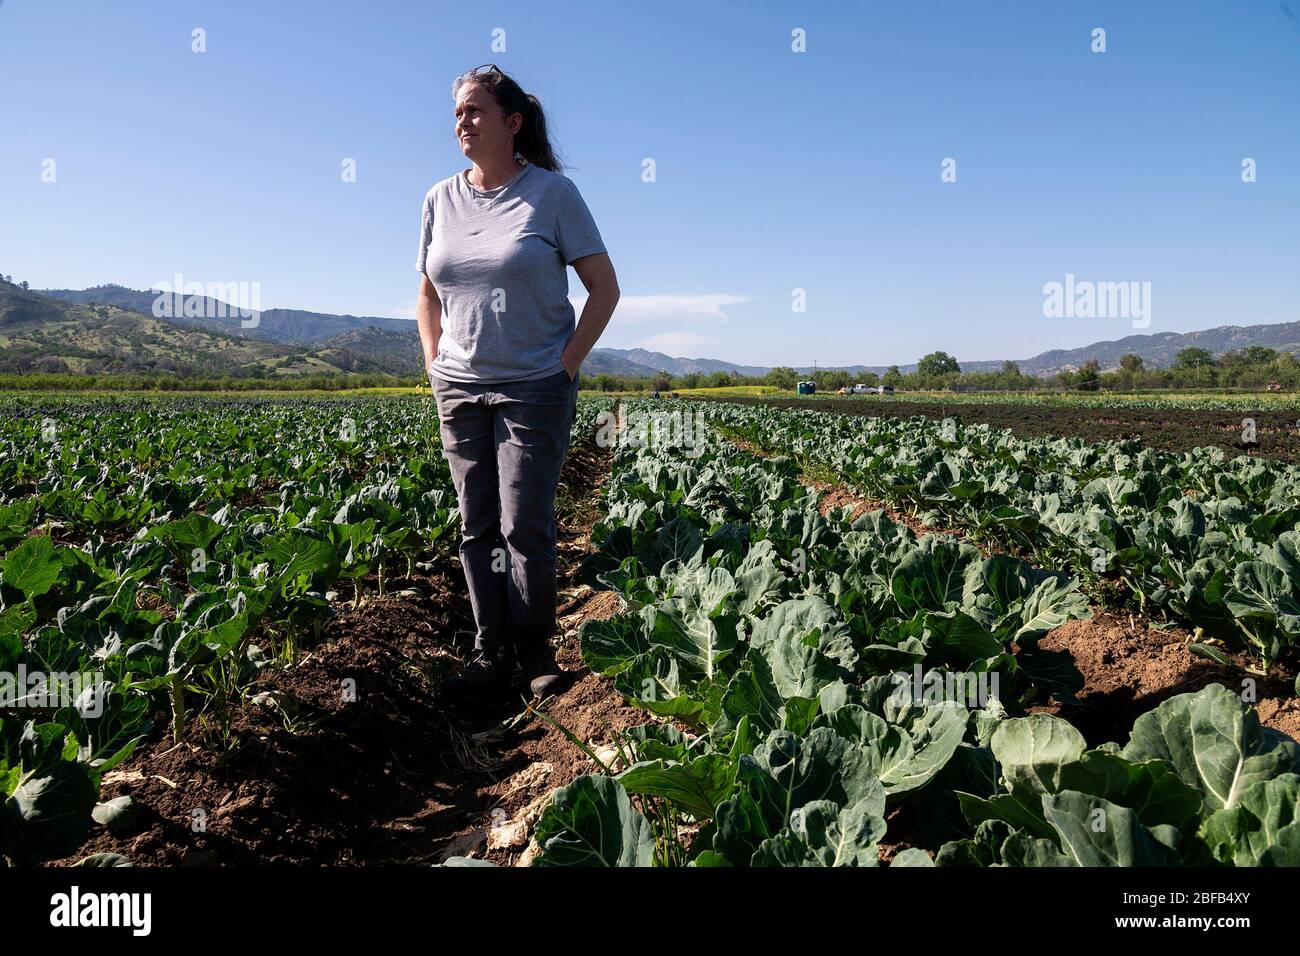 https://c8.alamy.com/comp/2BFB4XY/brooks-ca-usa-16th-apr-2020-organic-farmer-trina-campbell-of-riverdog-farm-in-guida-stands-is-one-of-her-collard-greens-fields-during-the-coronavirus-pandemic-on-thursday-april-16-2020-riverdog-farm-works-450-acres-of-land-in-the-capay-valley-and-her-company-has-had-four-fold-increase-in-sale-of-the-csa-community-supported-agriculture-boxes-of-fresh-produce-as-her-restaurants-sales-have-diminished-credit-paul-kitagaki-jrzuma-wirealamy-live-news-2BFB4XY.jpg